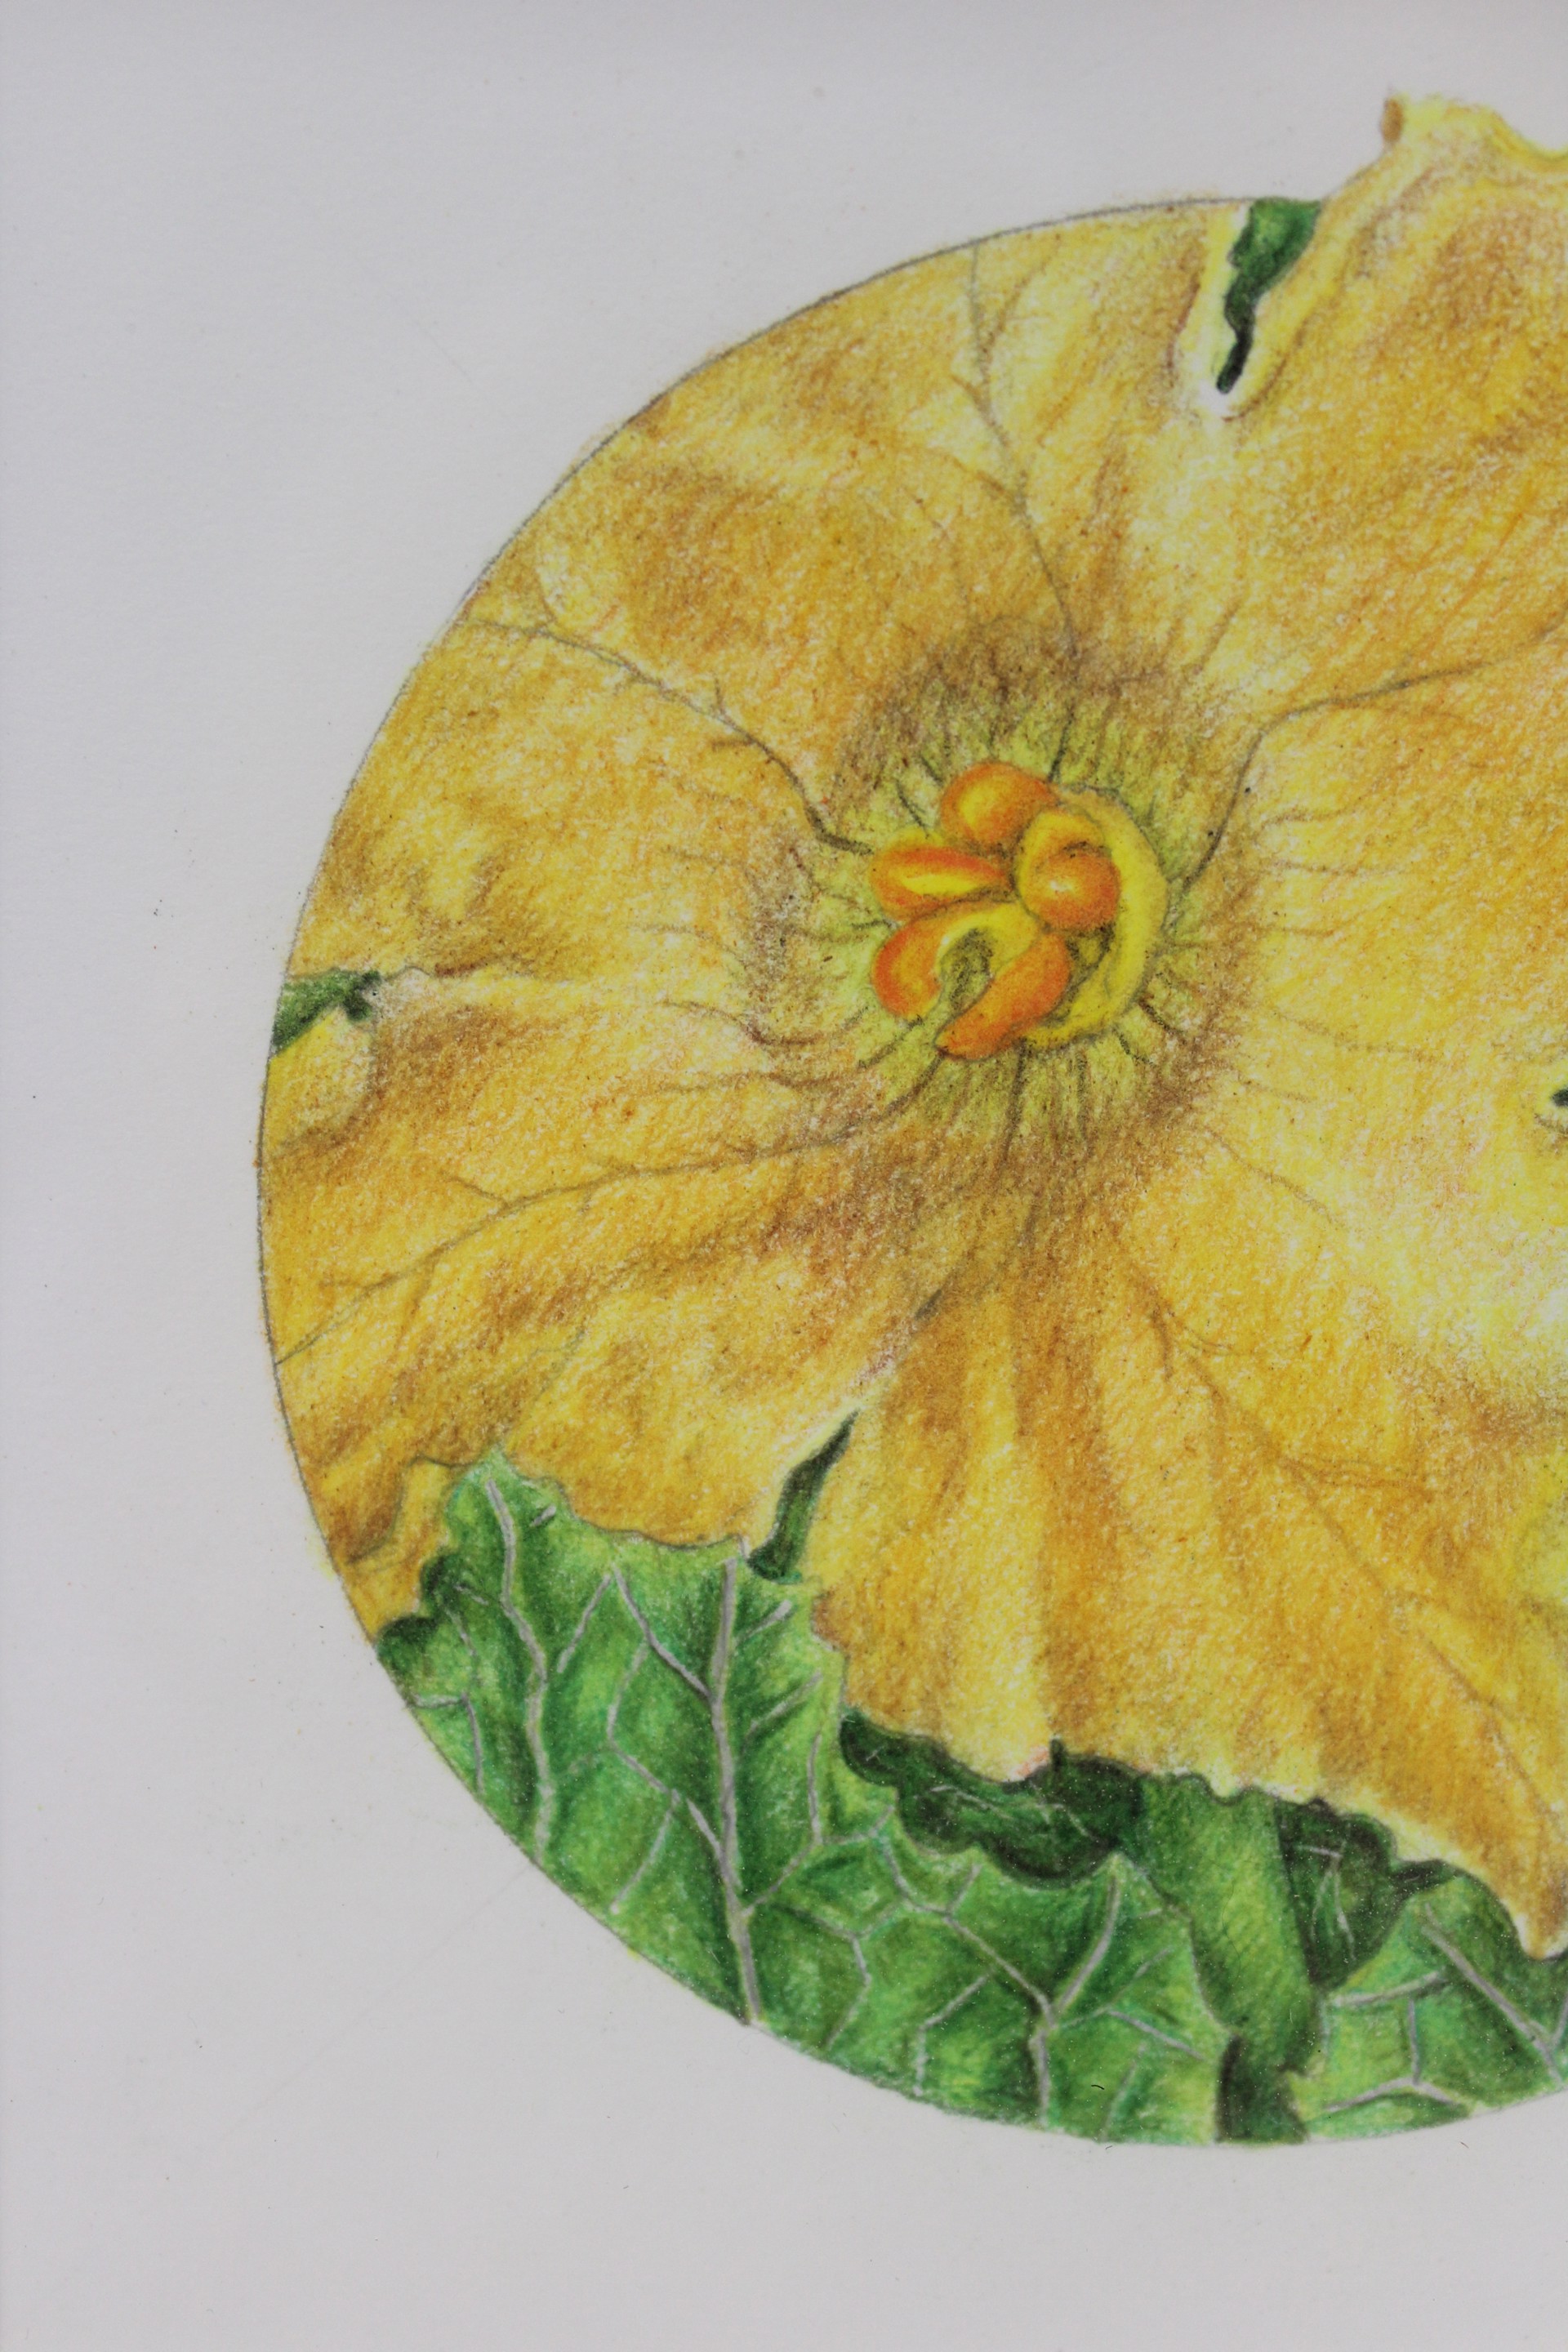 Squash Flower by Mary Lee Eggart